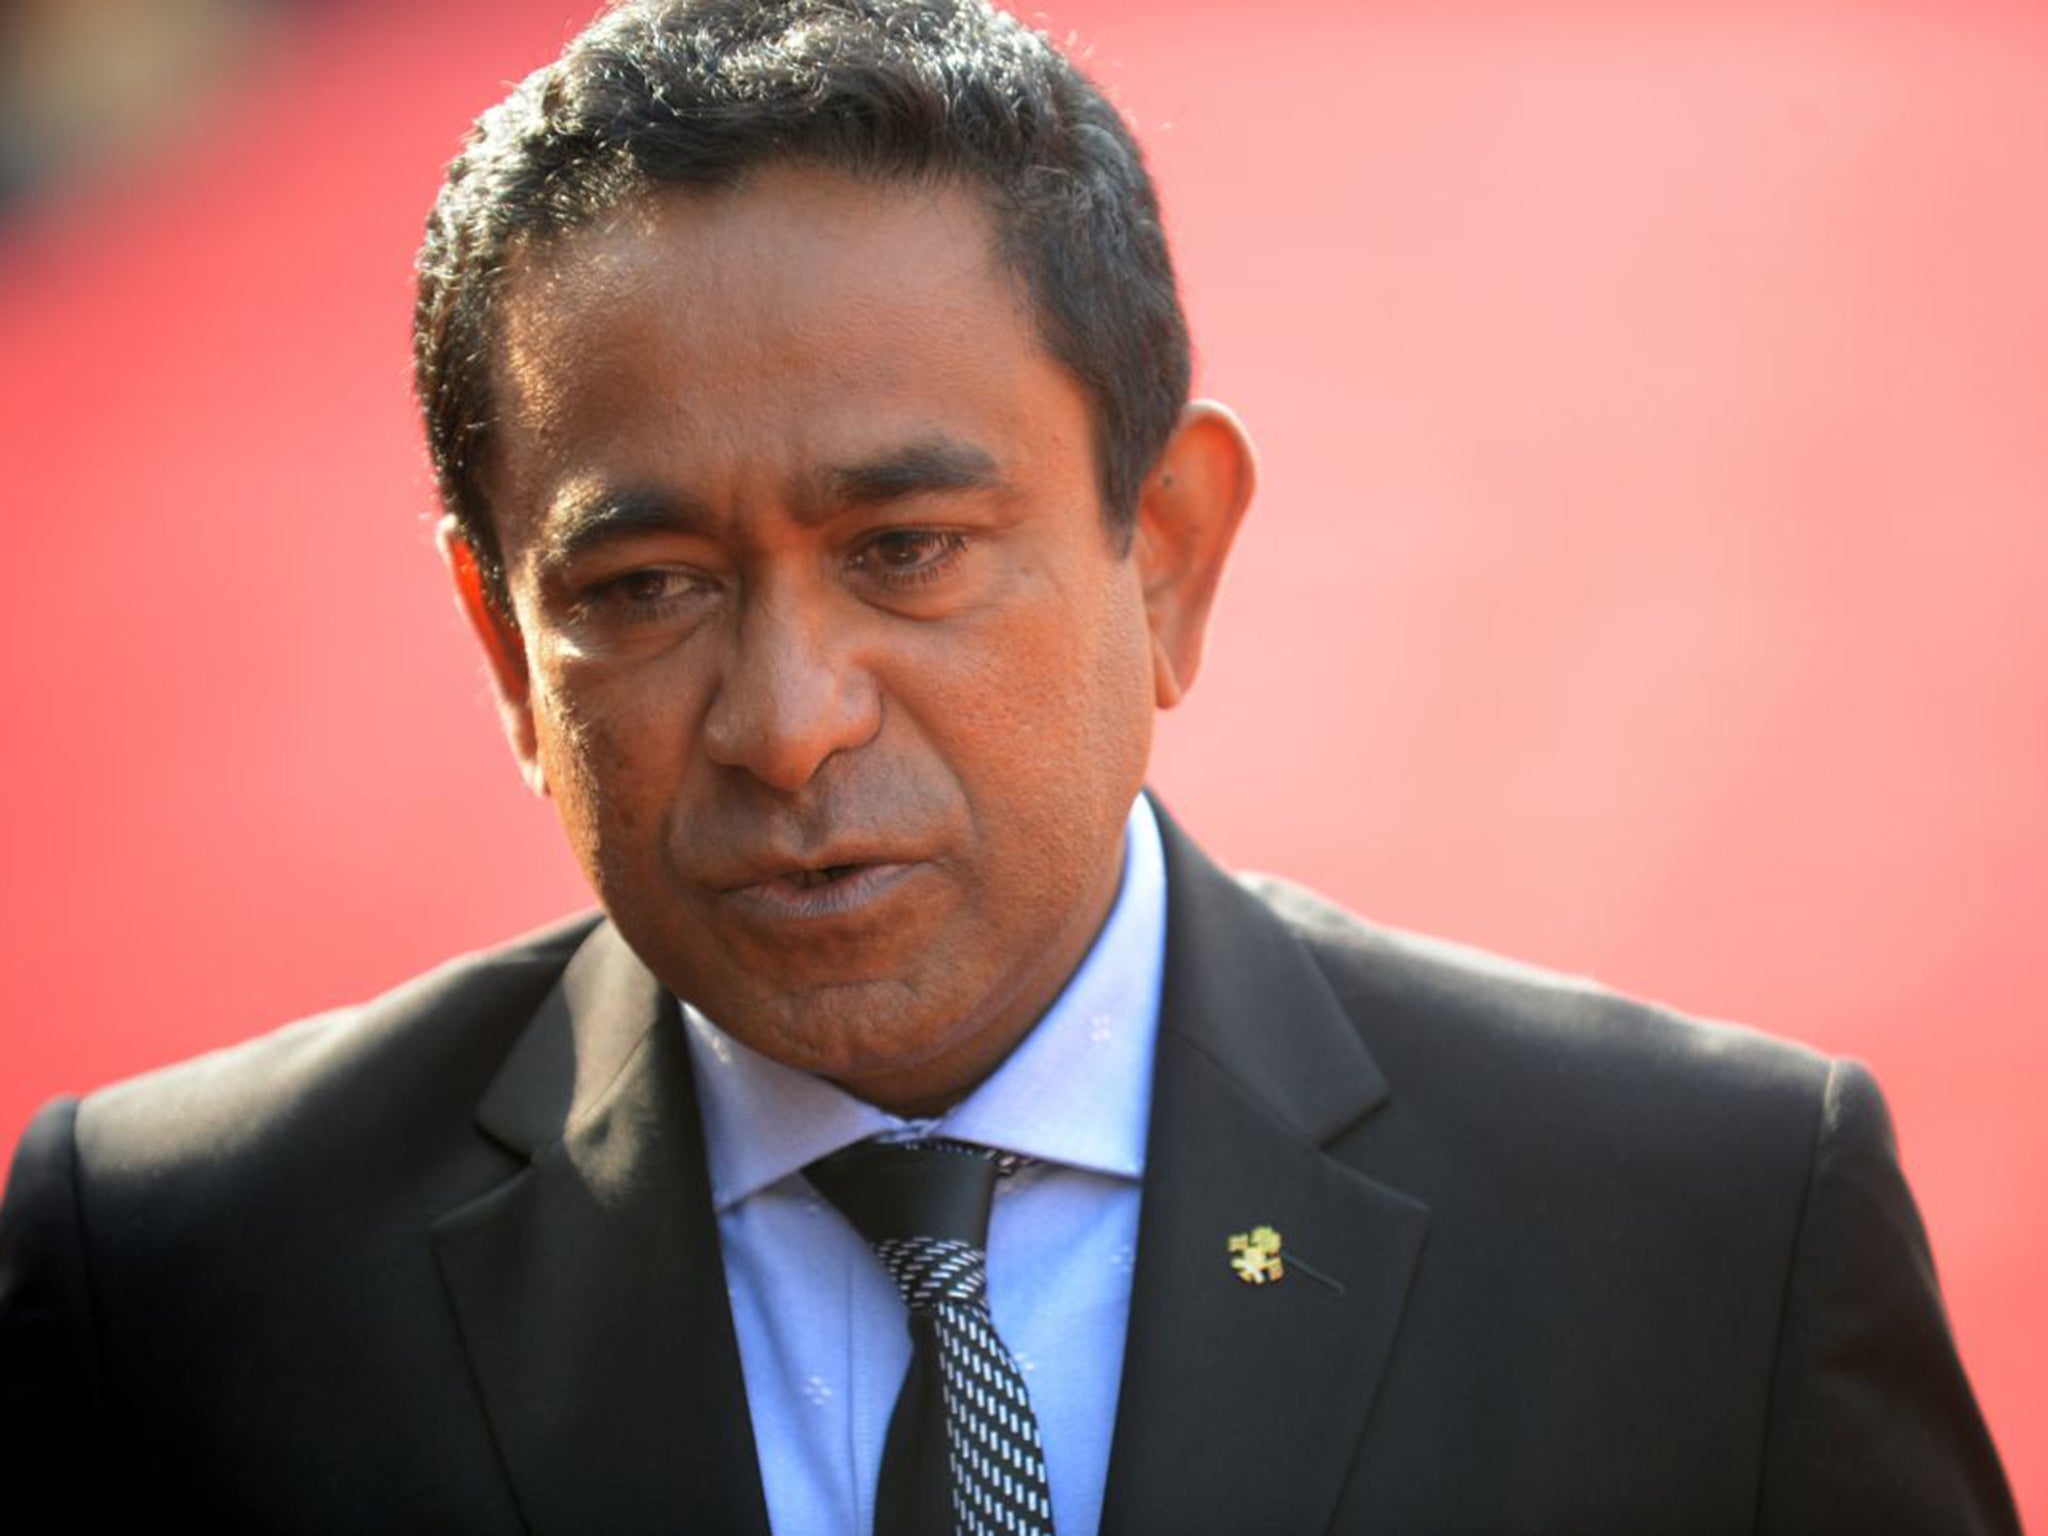 Omnia Strategy is to advise President Abdulla Yameen’s government on “democracy consolidation”